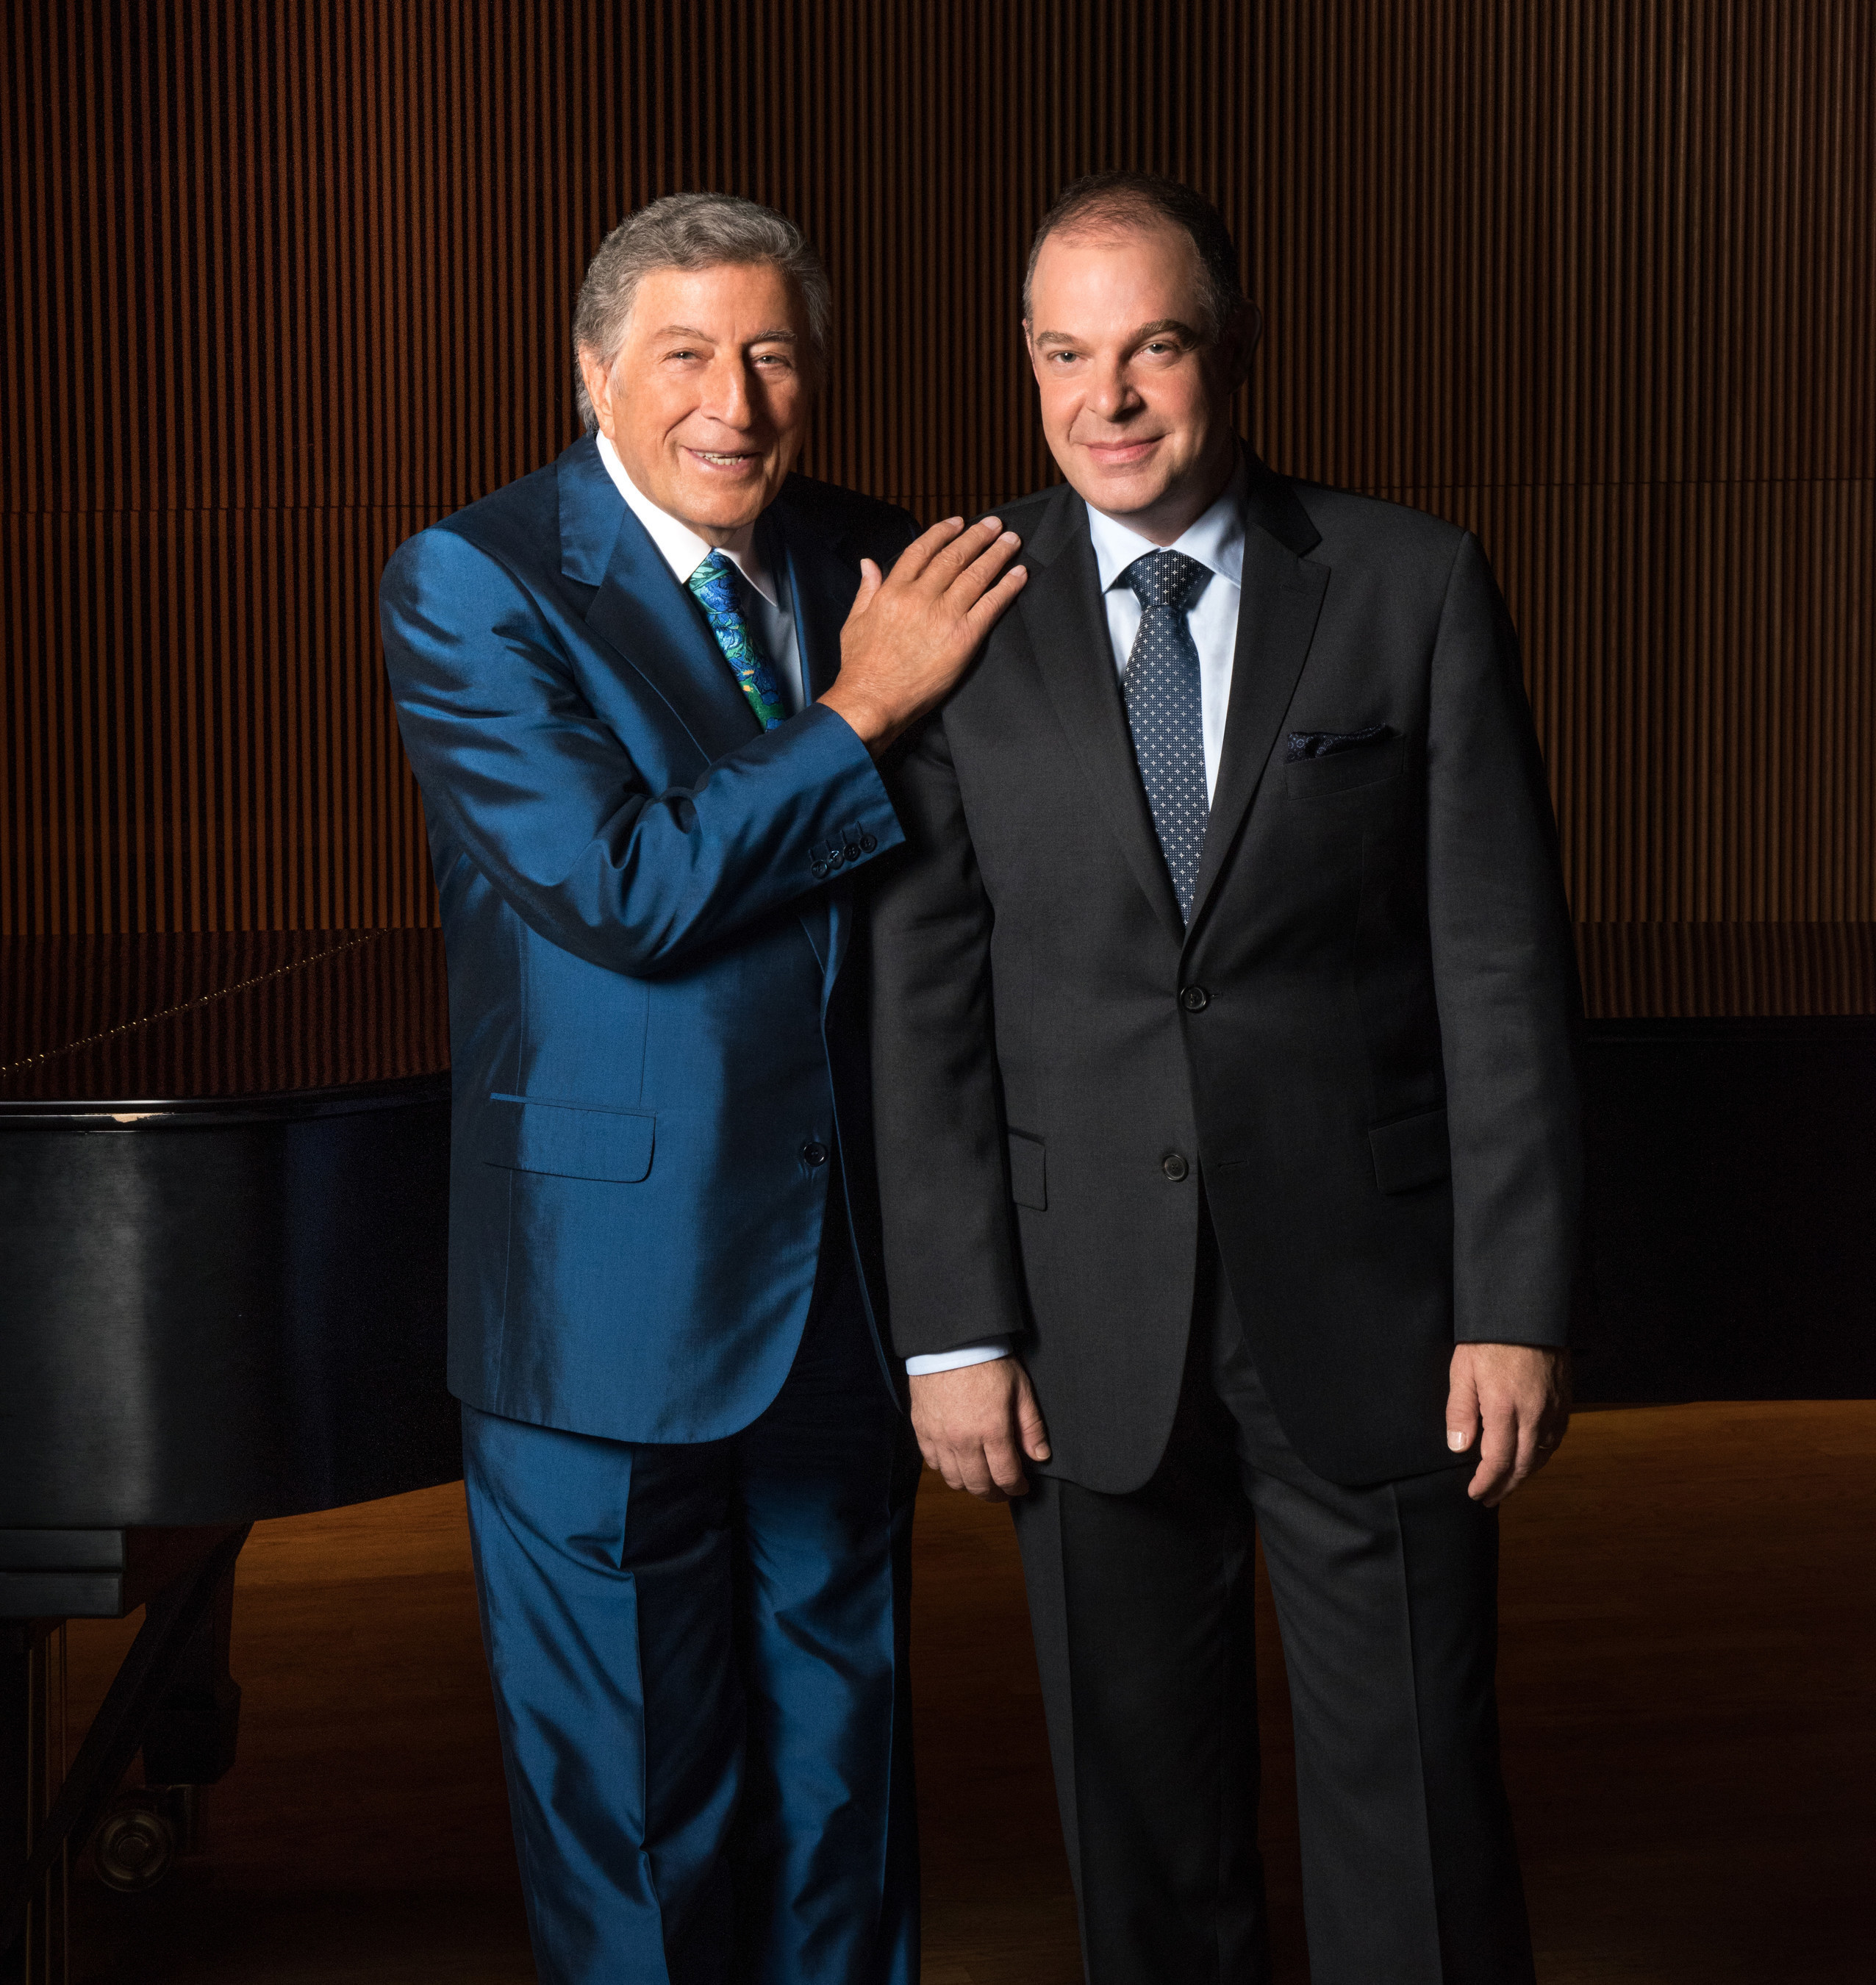 Photo Credit: Kelsey Bennett Music Legend Tony Bennett and Jazz Pianist Bill Charlap Record The Silver Lining: The Songs of Jerome Kern